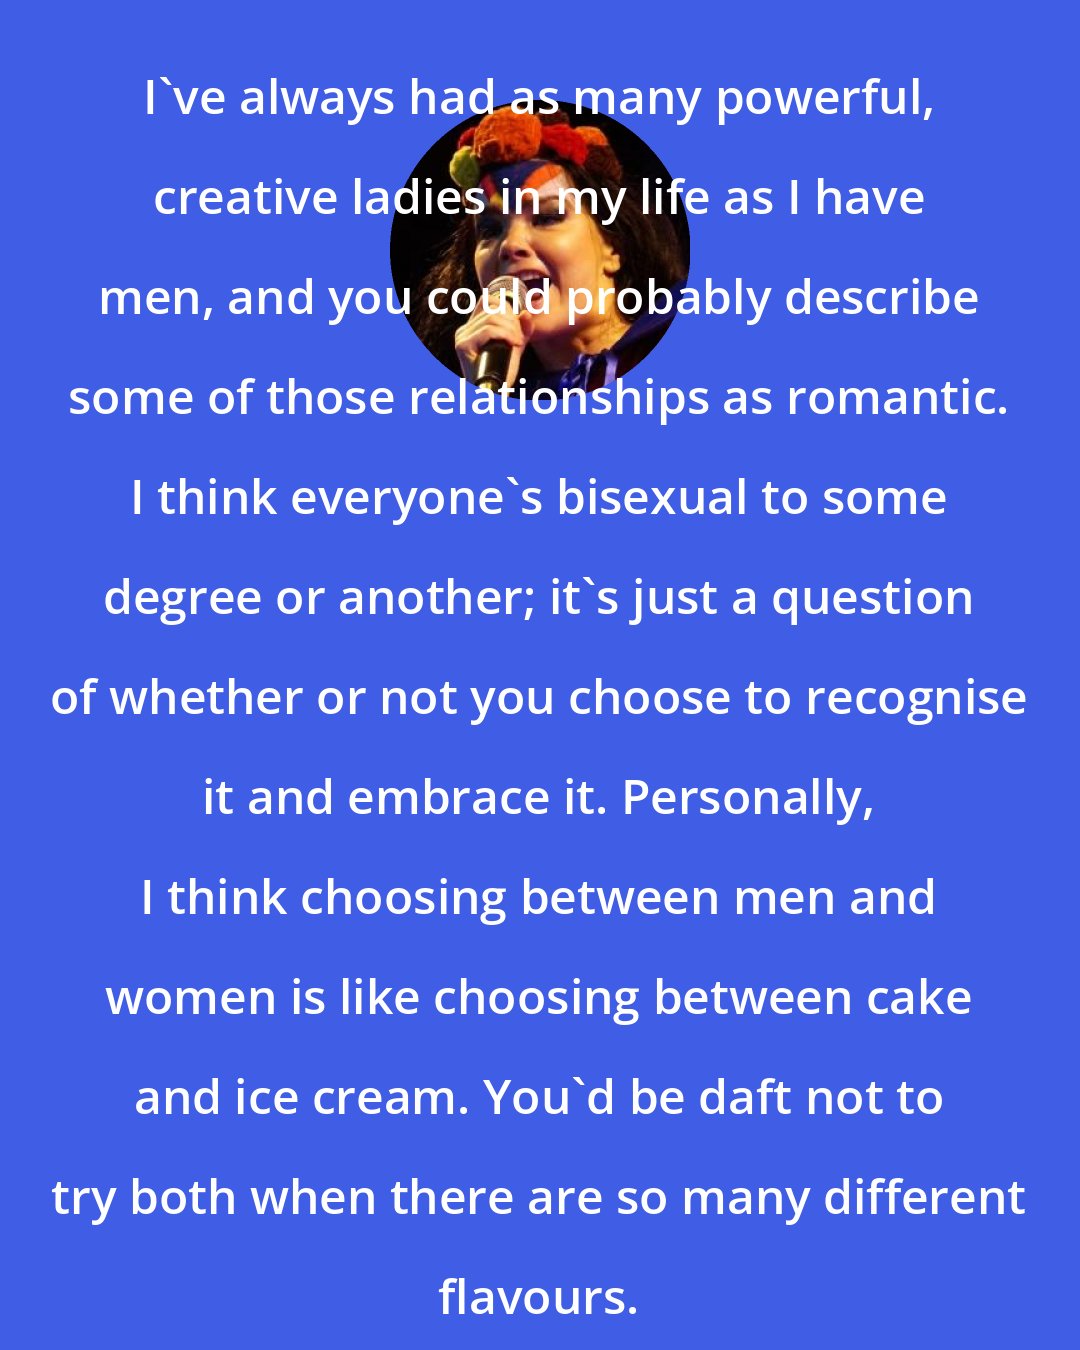 Bjork: I've always had as many powerful, creative ladies in my life as I have men, and you could probably describe some of those relationships as romantic. I think everyone's bisexual to some degree or another; it's just a question of whether or not you choose to recognise it and embrace it. Personally, I think choosing between men and women is like choosing between cake and ice cream. You'd be daft not to try both when there are so many different flavours.